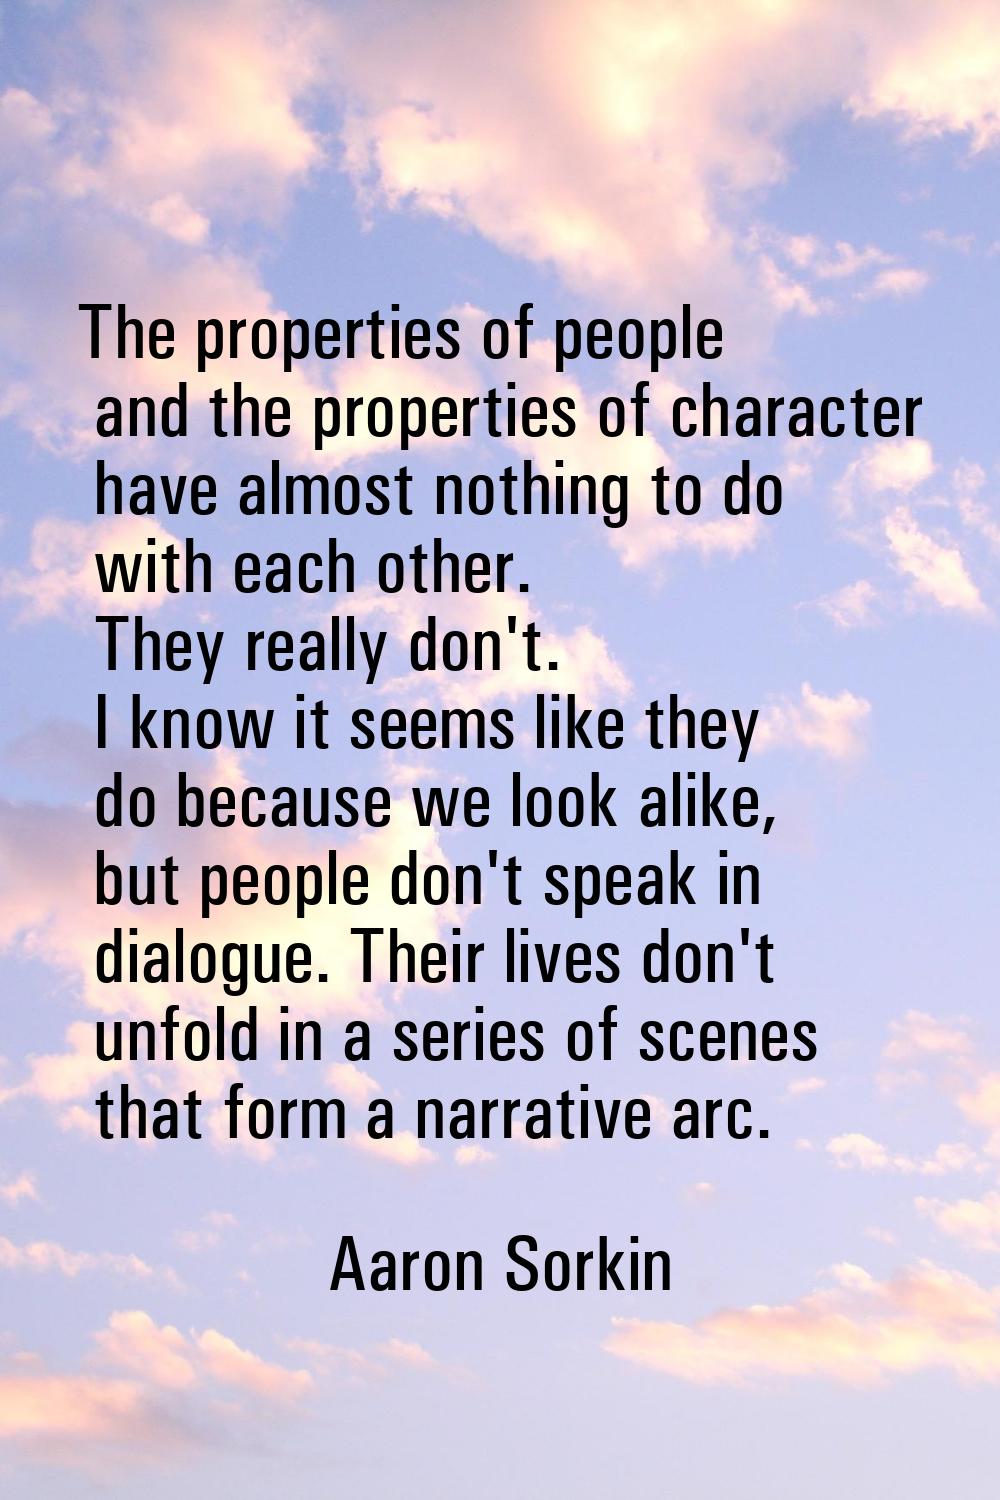 The properties of people and the properties of character have almost nothing to do with each other.